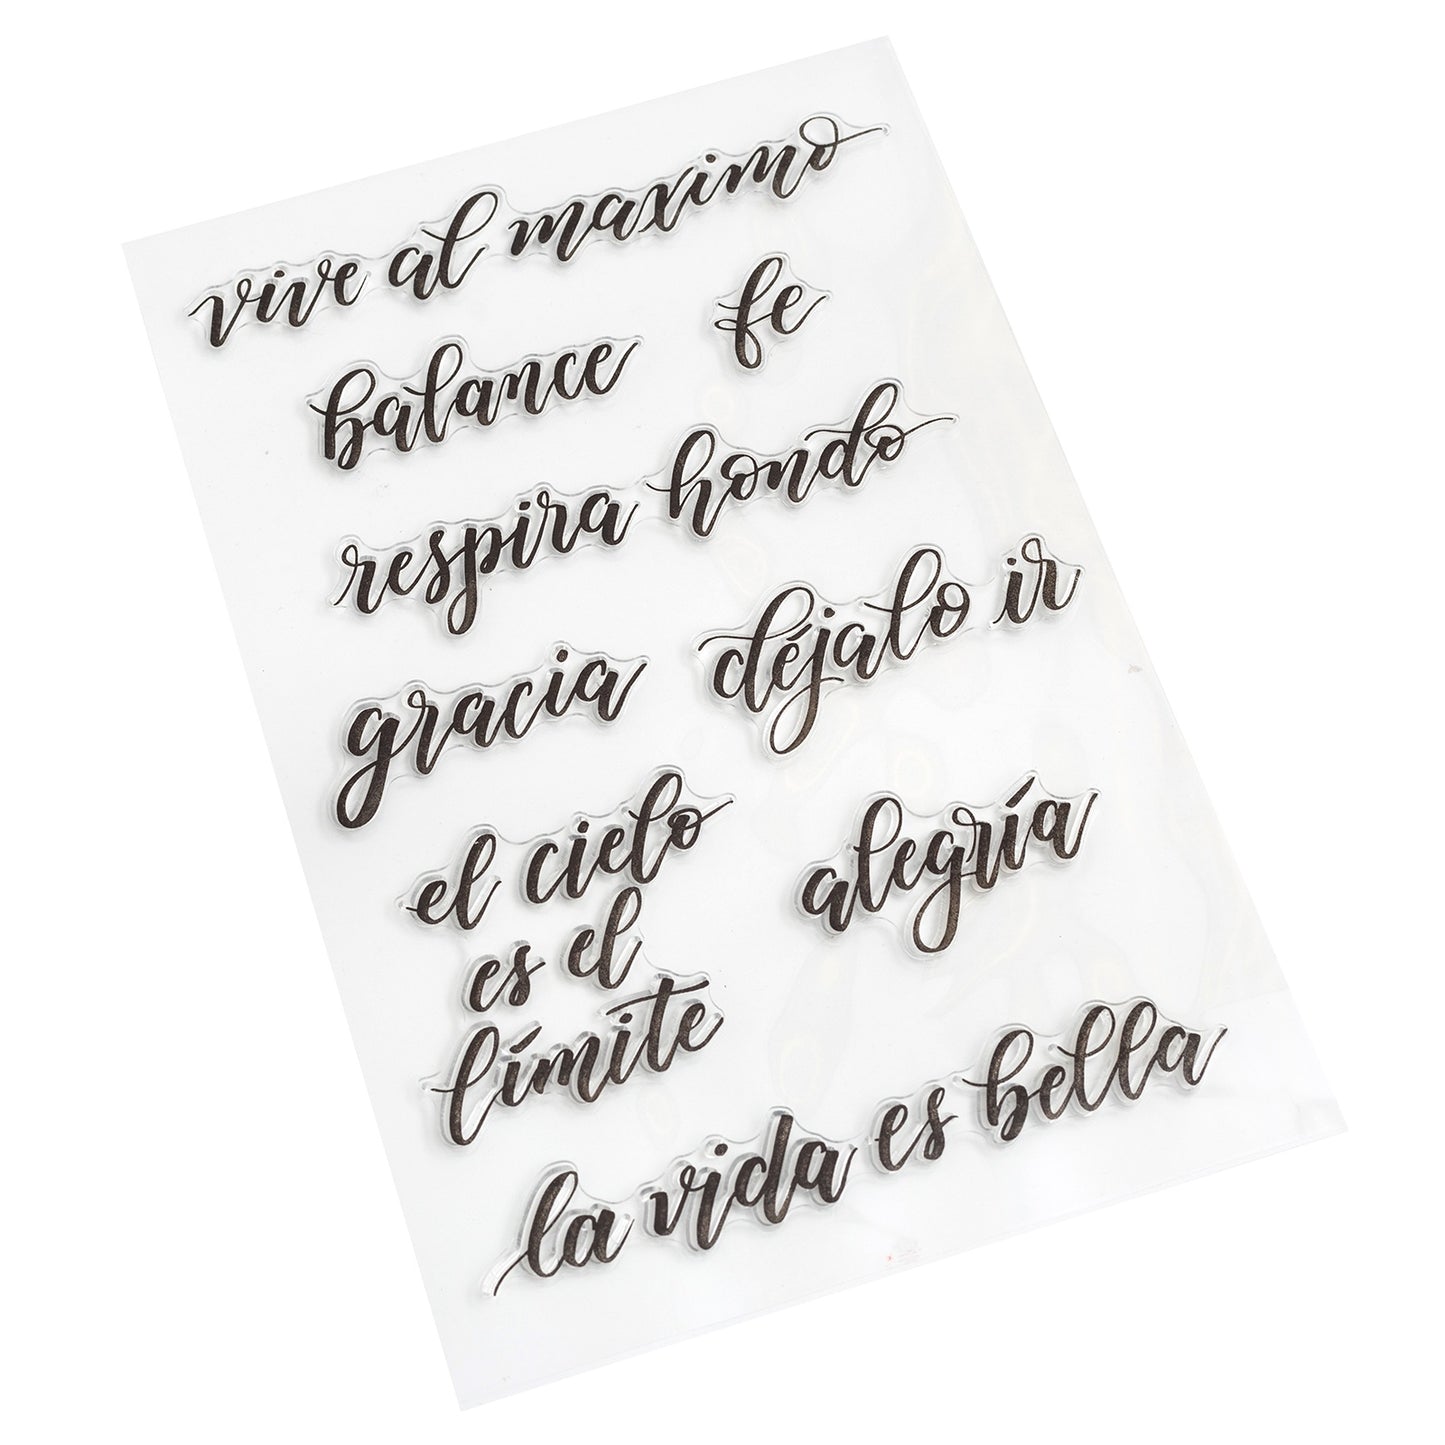 Kelly Creates Acrylic Traceable Stamps-Quotes #1 (Spanish)